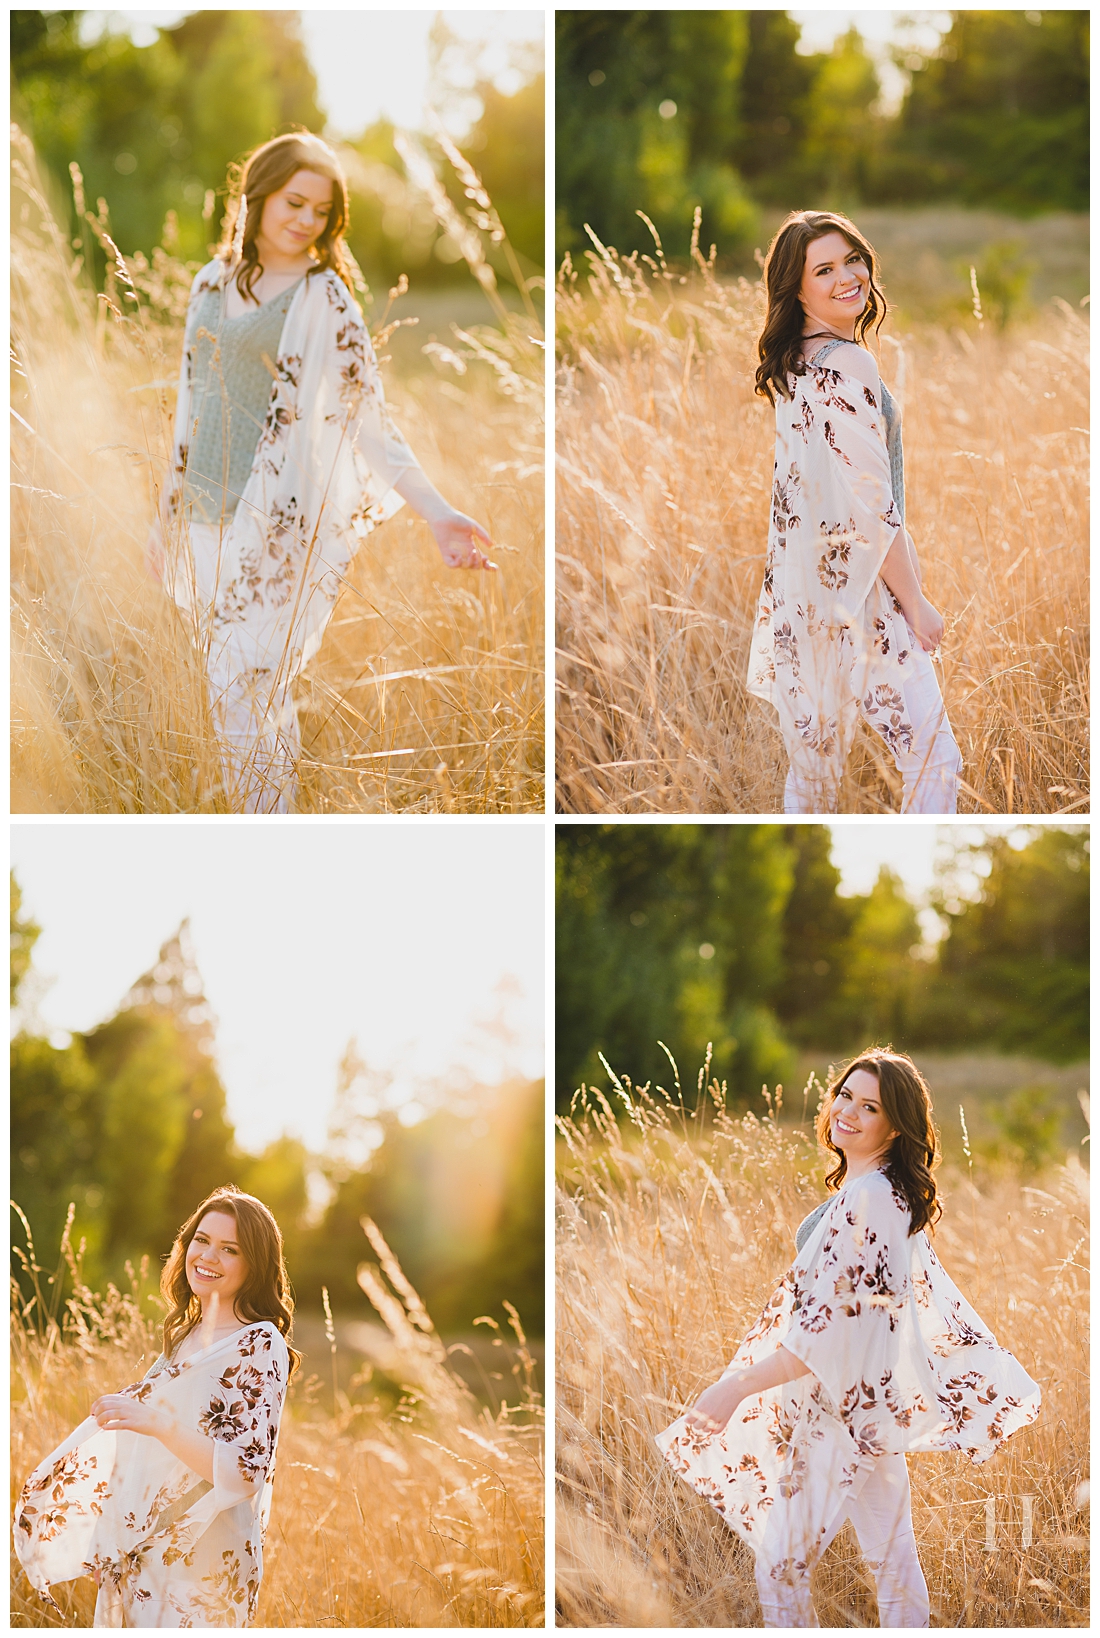 Rustic Senior Portraits in a Grassy Field | Candid Portraits for Seniors, Pose Ideas for Outdoor Senior Portrait Sessions | Amanda Howse Photography | The Best Tacoma Senior Portrait Photographer